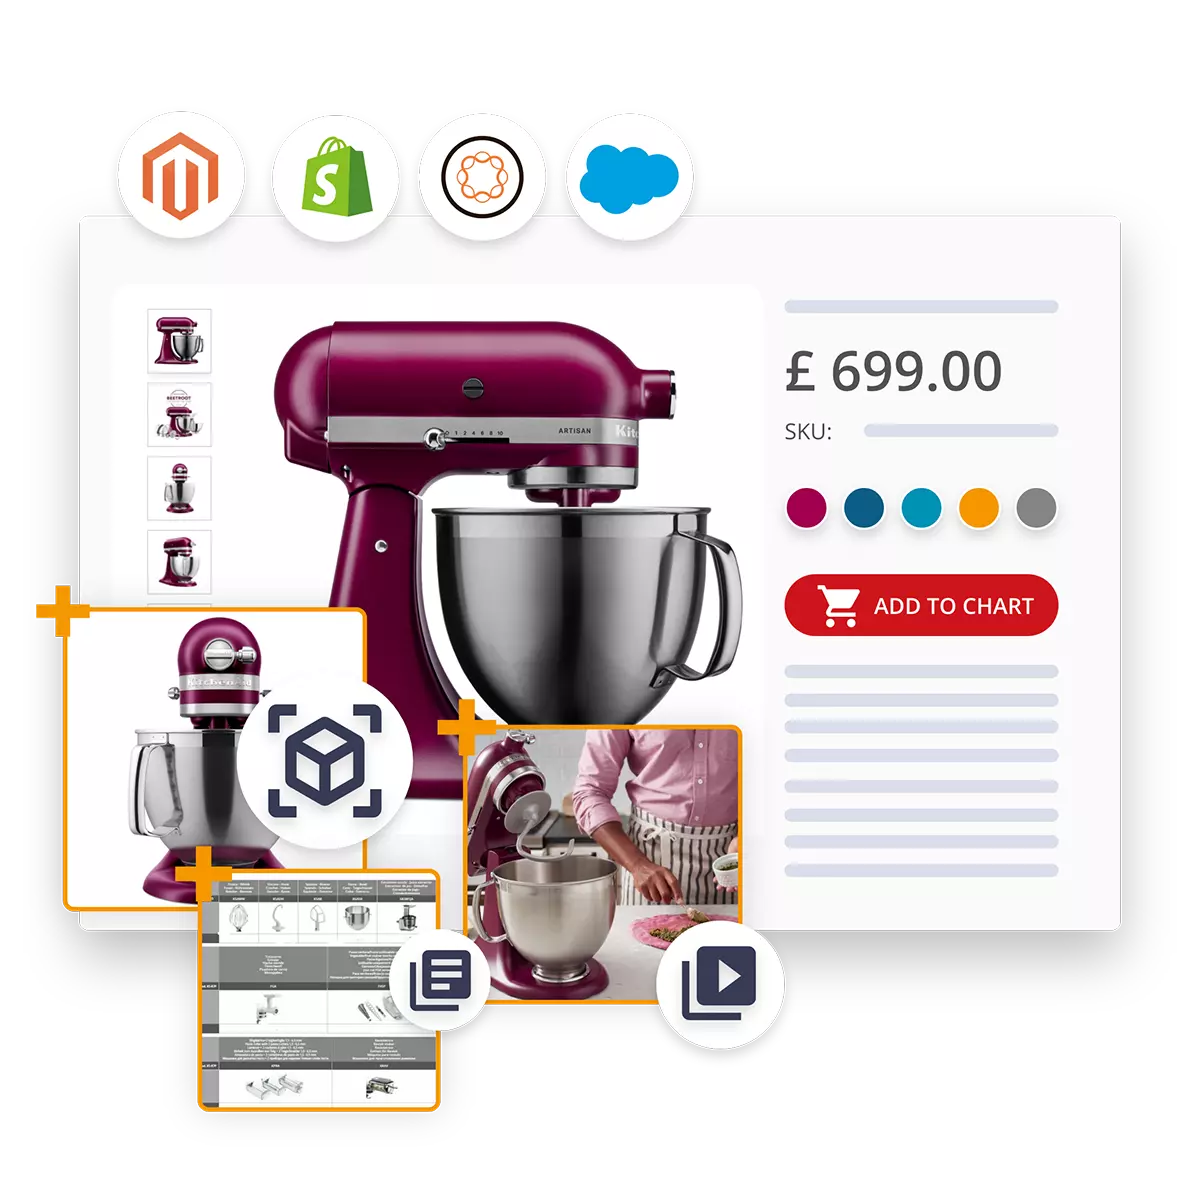 example of a product sheet for a kneading machine published on various online e-commerce channels